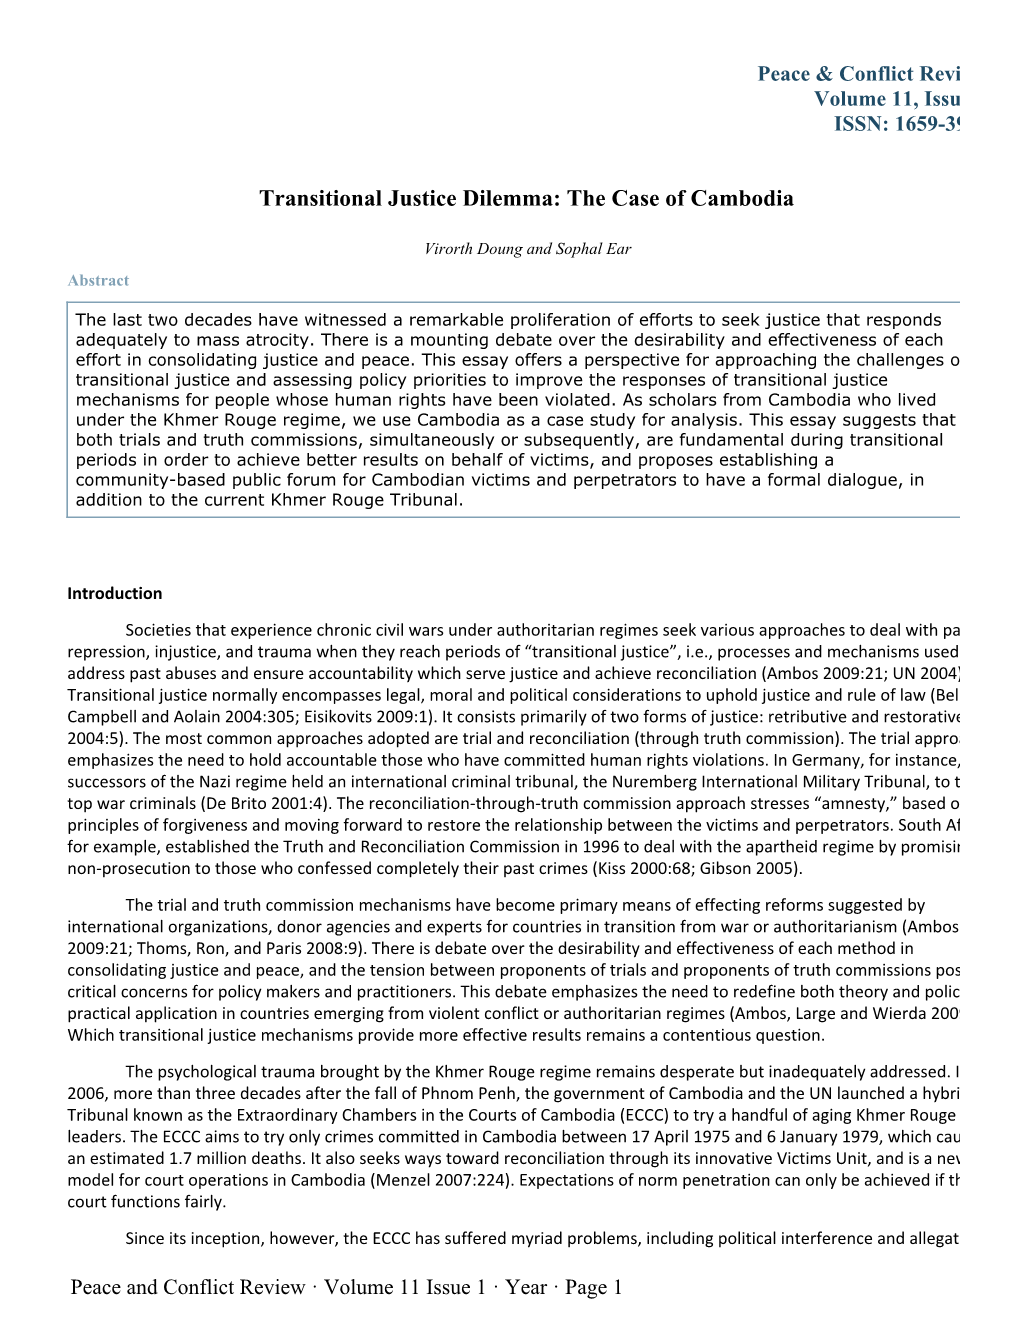 Transitional Justice Dilemma: the Case of Cambodia